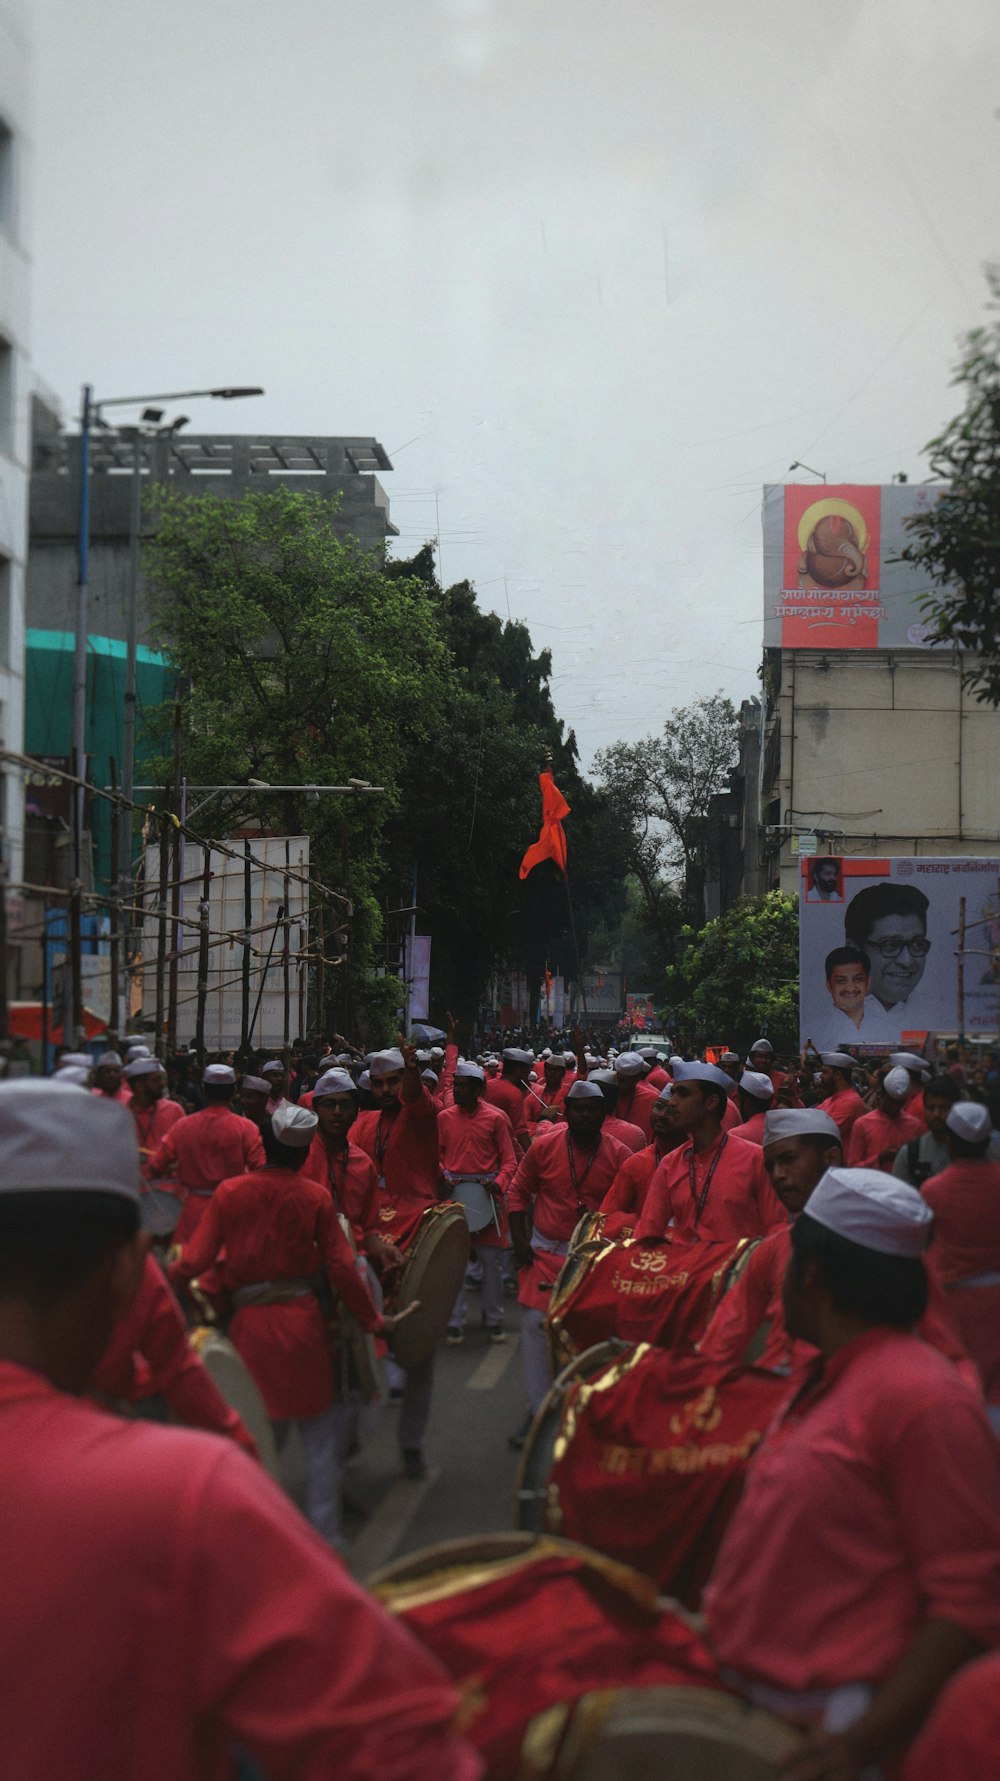 a large group of people in red outfits